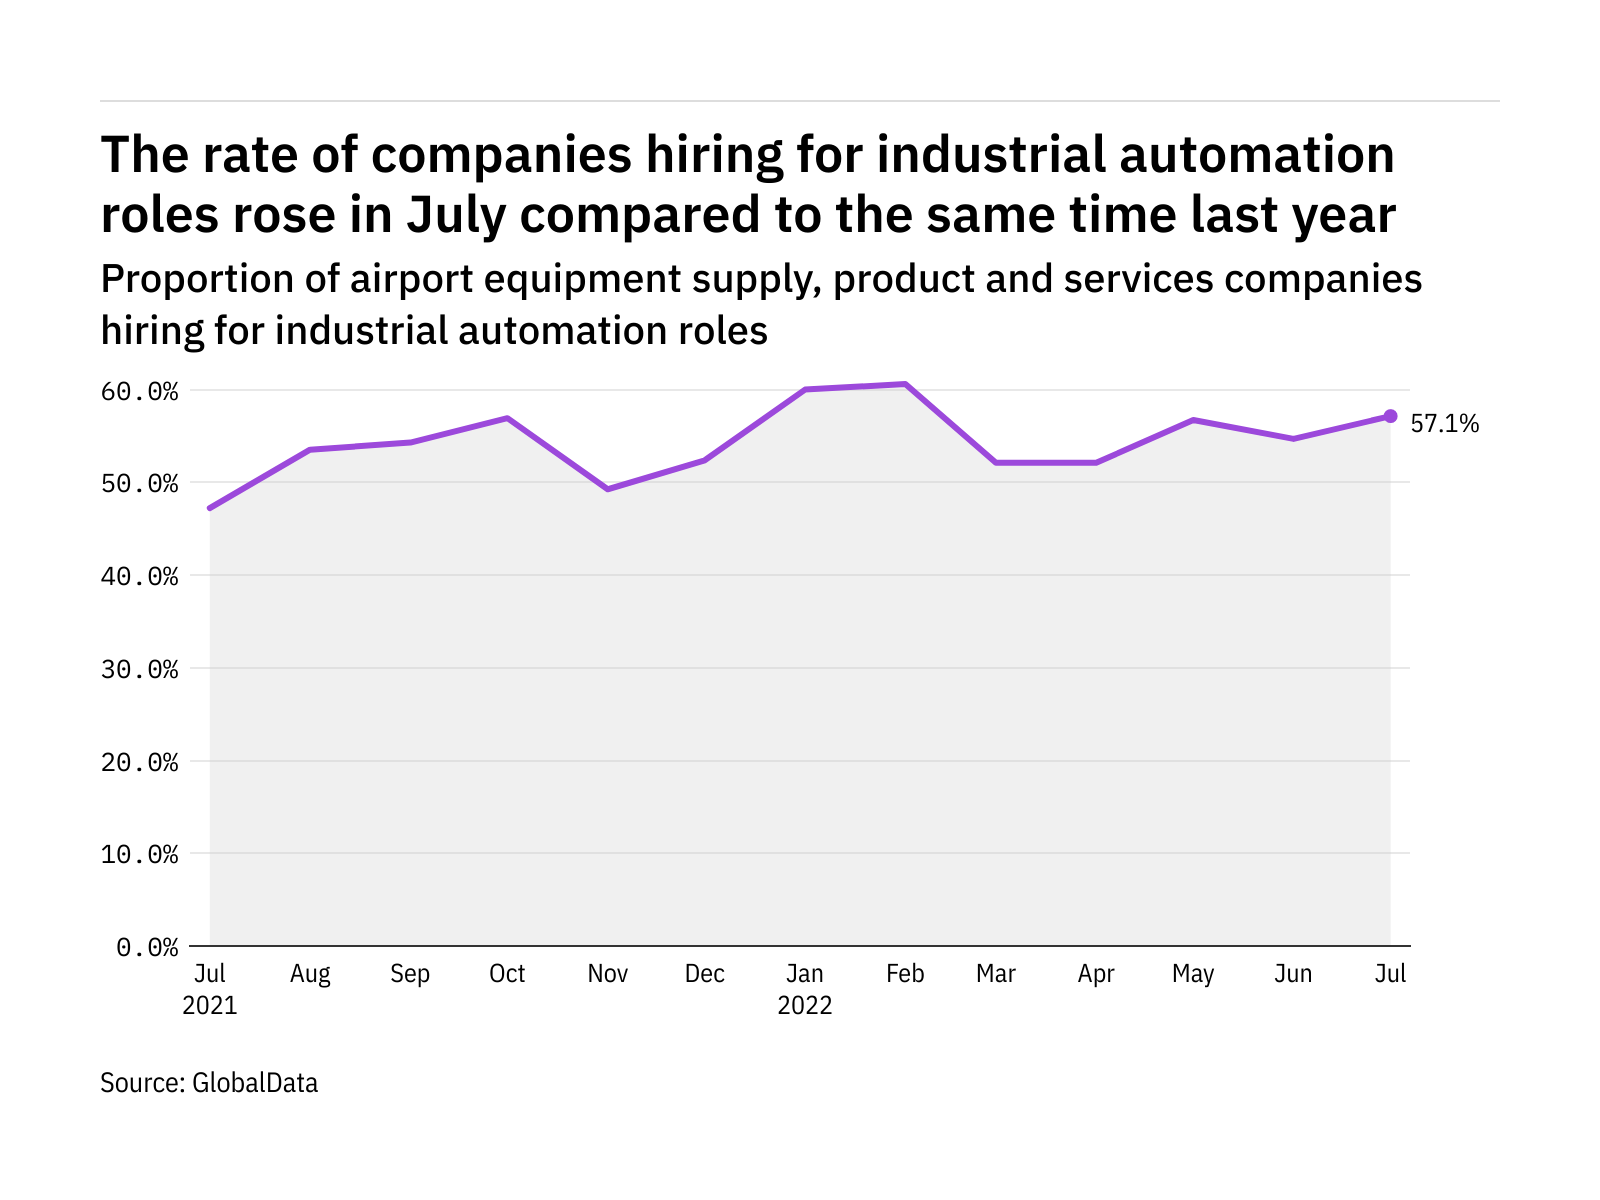 Industrial automation hiring levels in the airport industry rose in July 2022